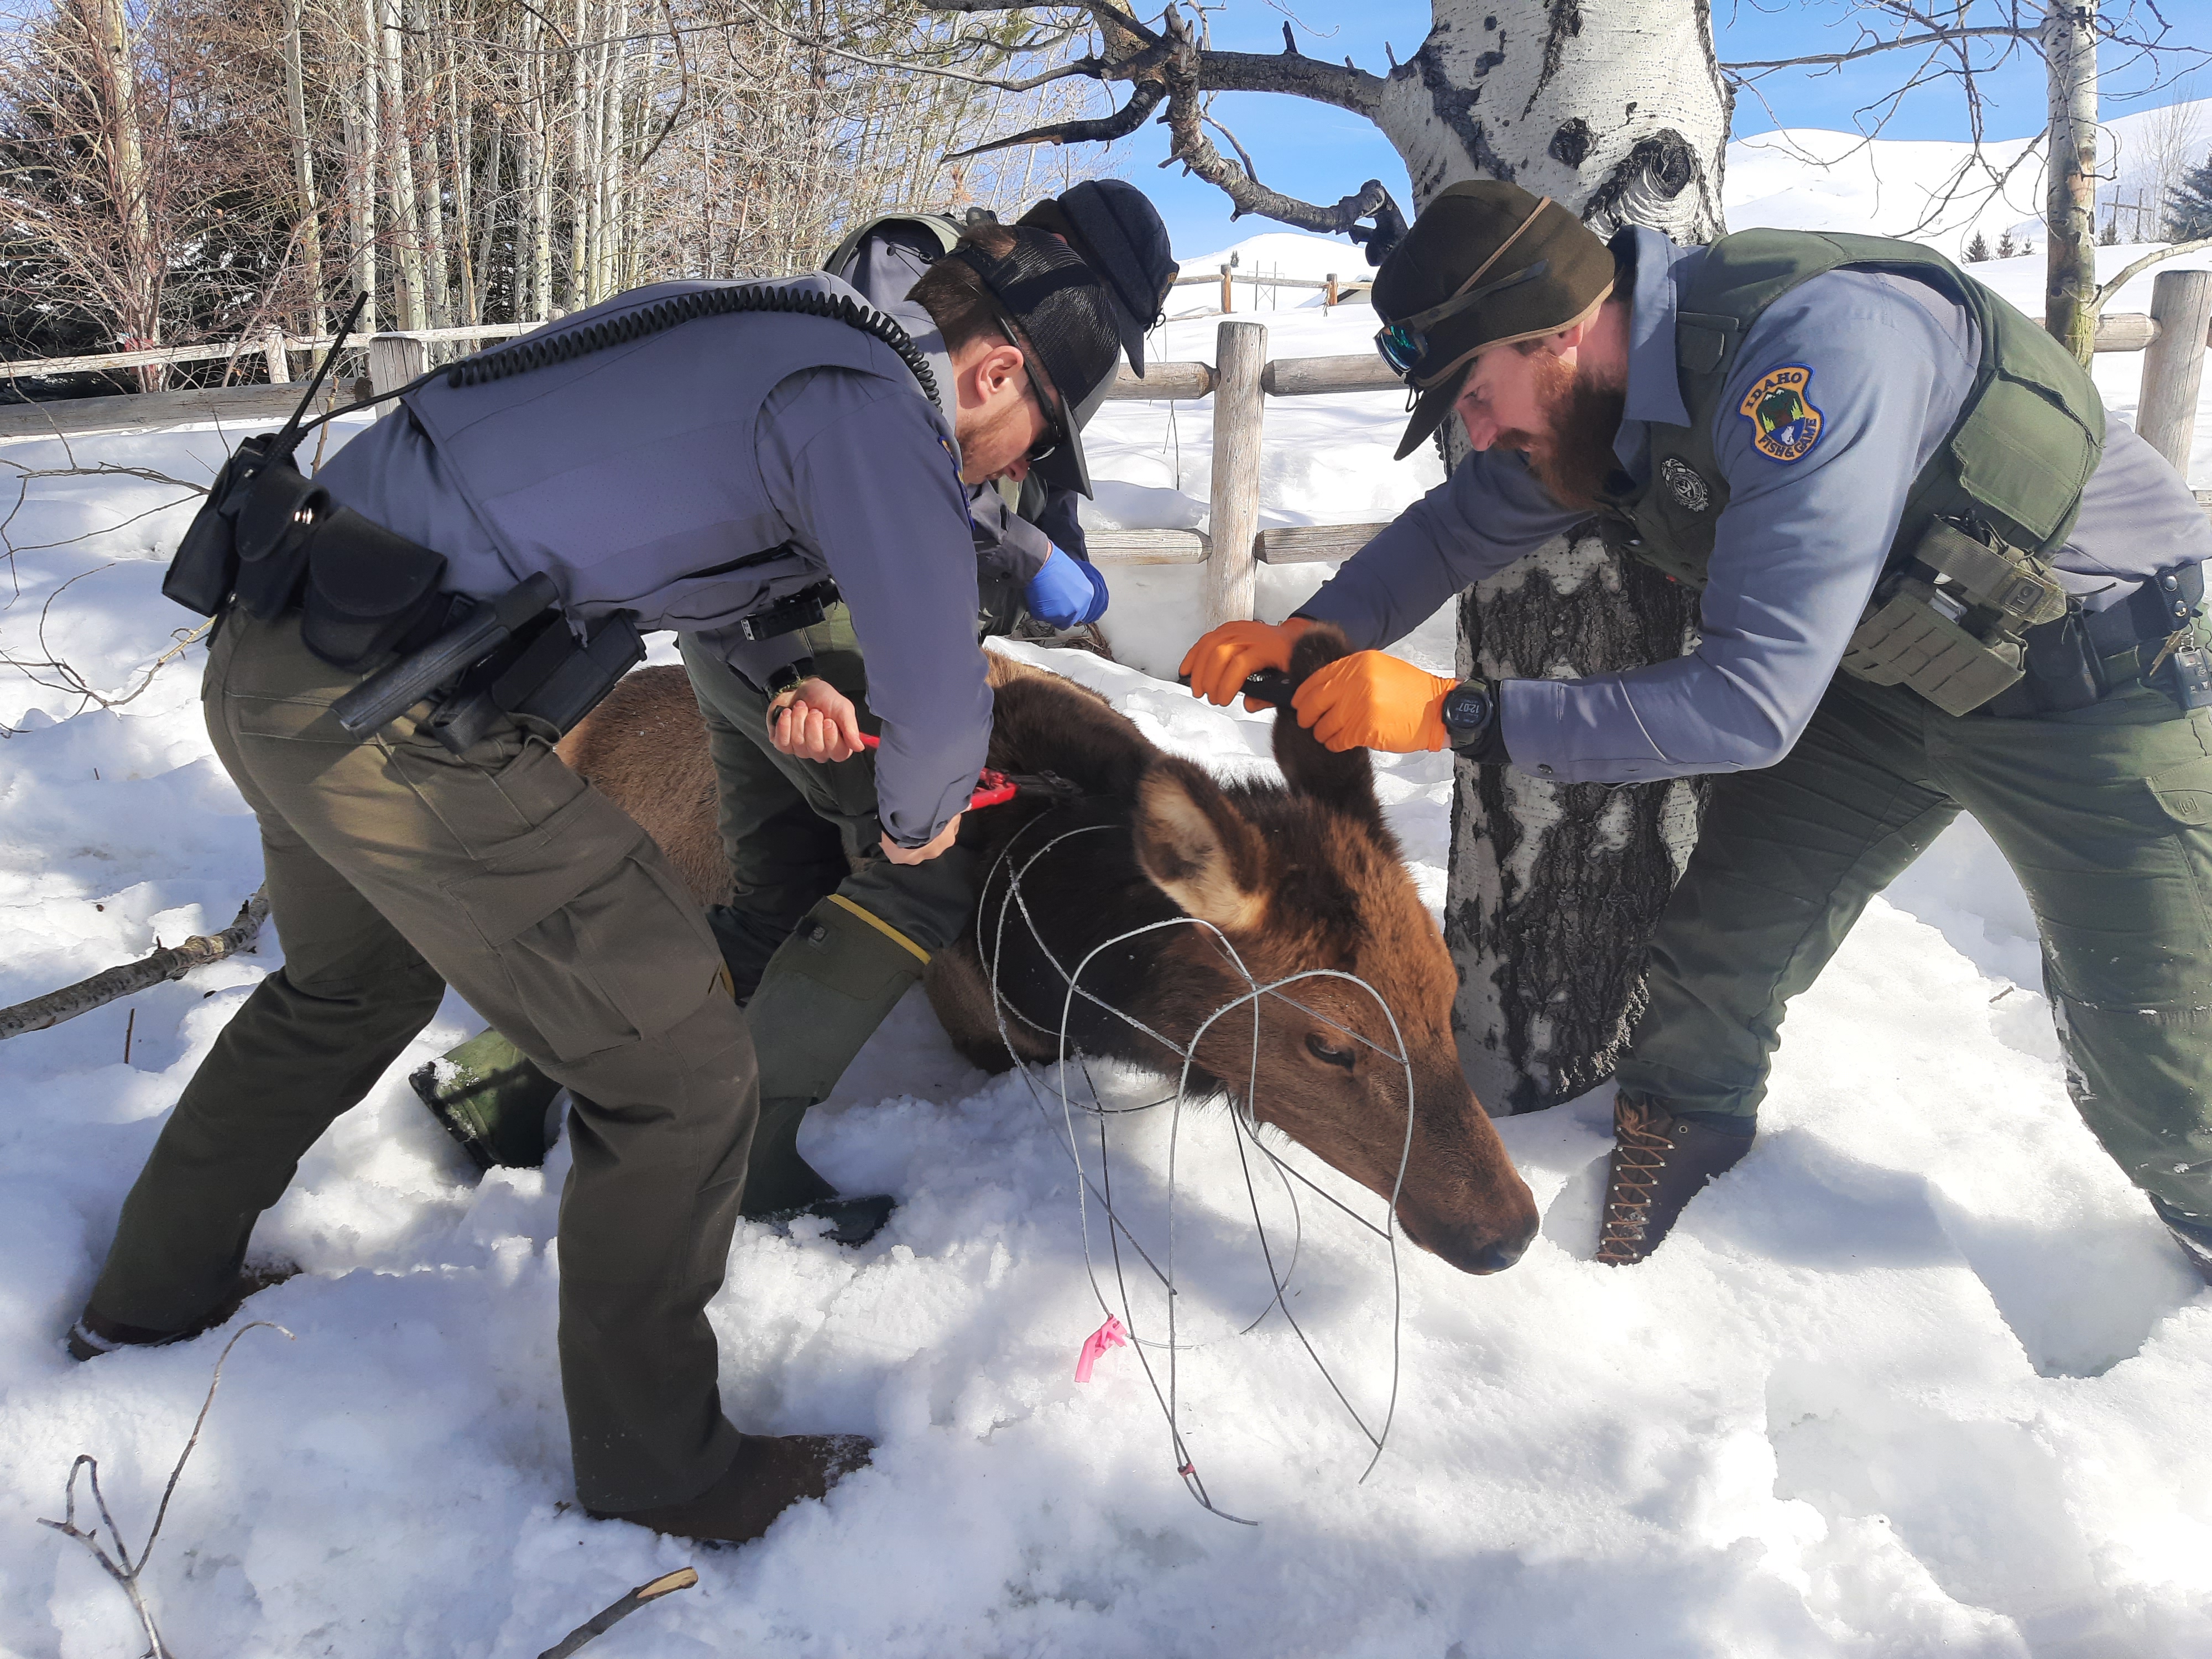 A wire tomato cage is removed from an anesthetized elk in Blaine County.